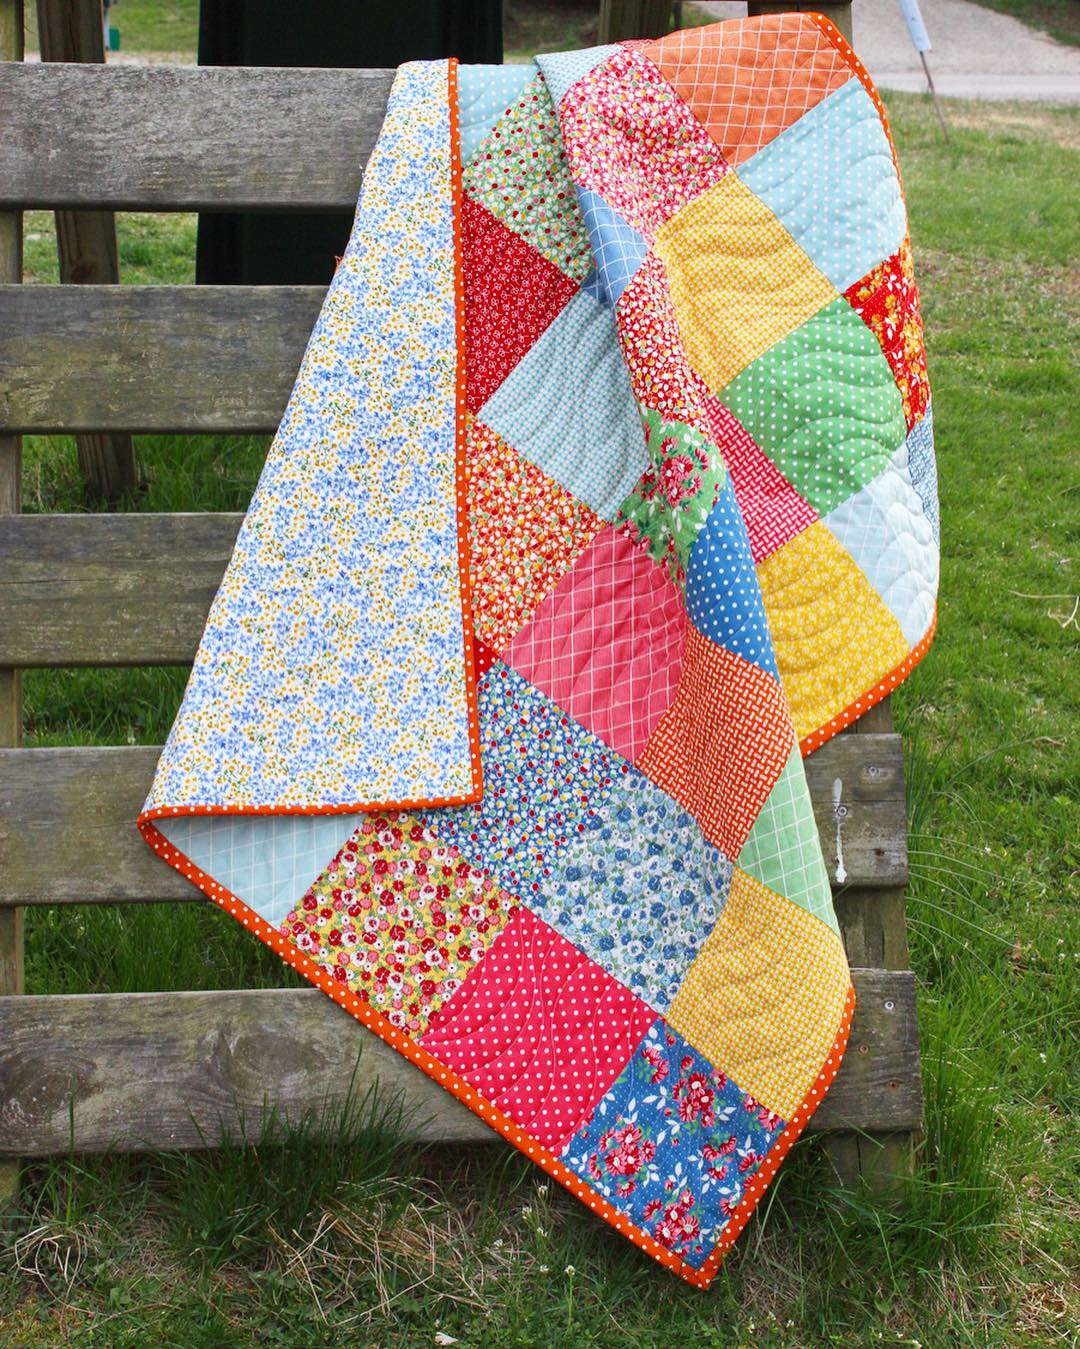 quilting-patterns-easy-a-pretty-quilt-made-for-charity-love-the-quilt